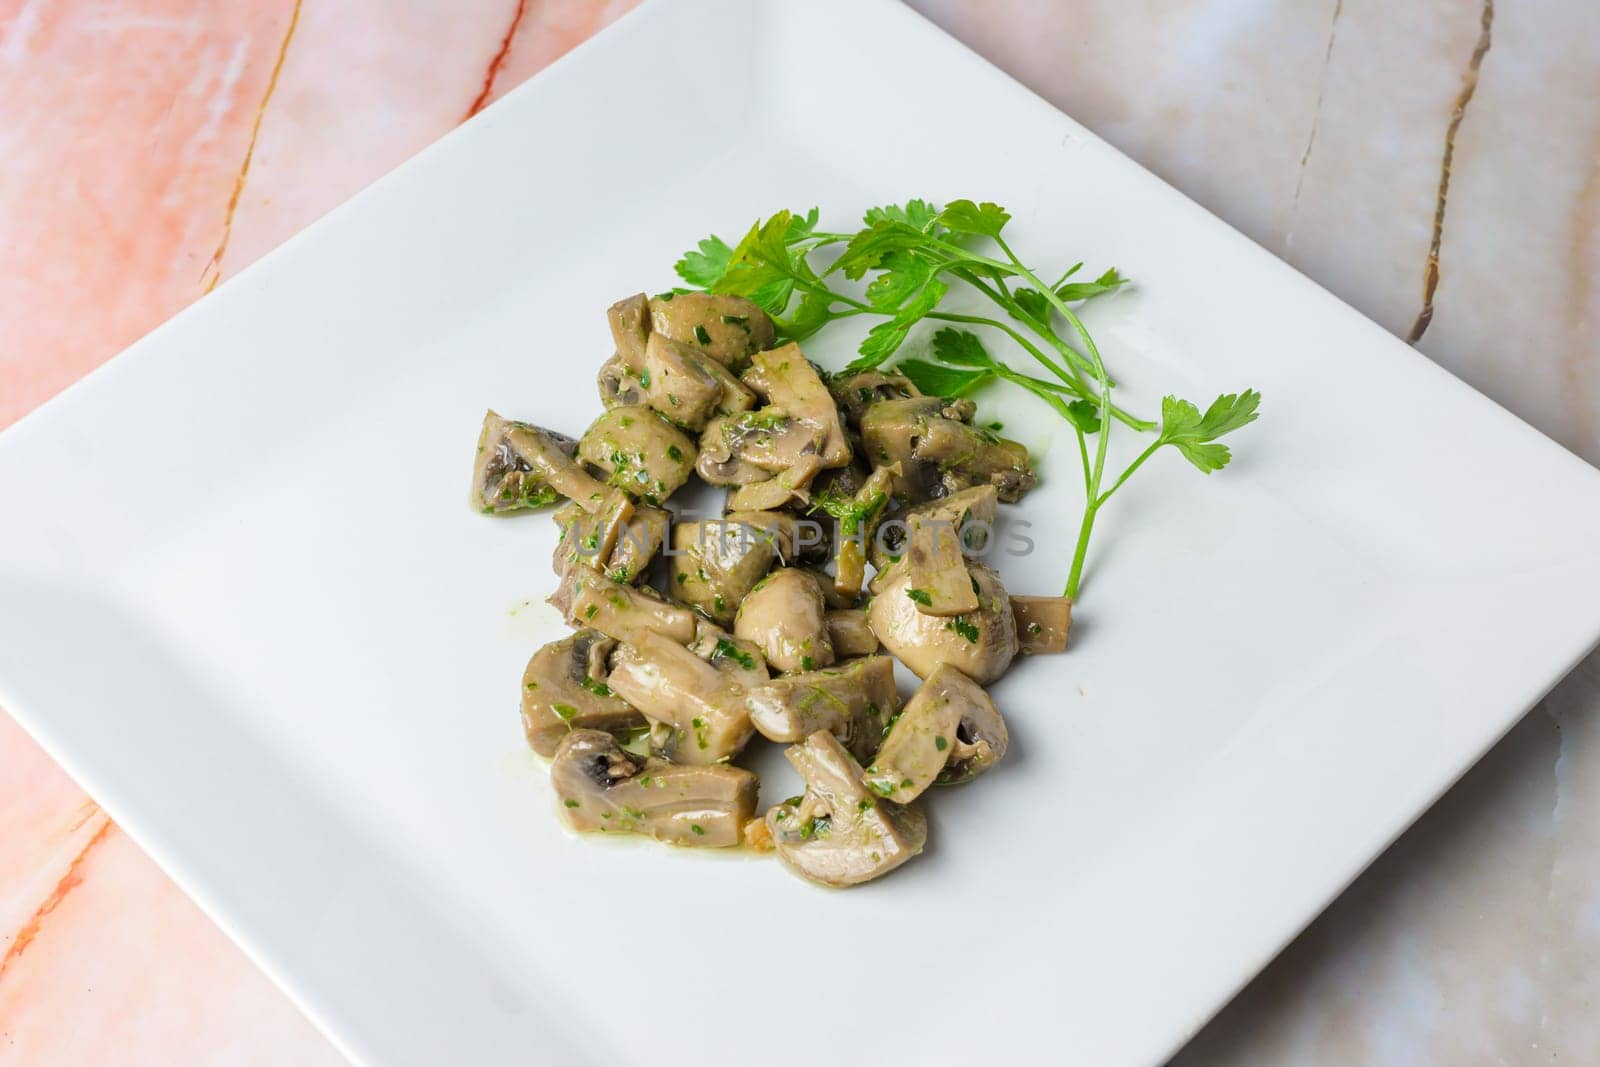 Herb-marinated mushrooms with parsley on a square white plate, typical food, typical mediterranean mallorcan cuisine typical from balearic islands mallorca, spain,